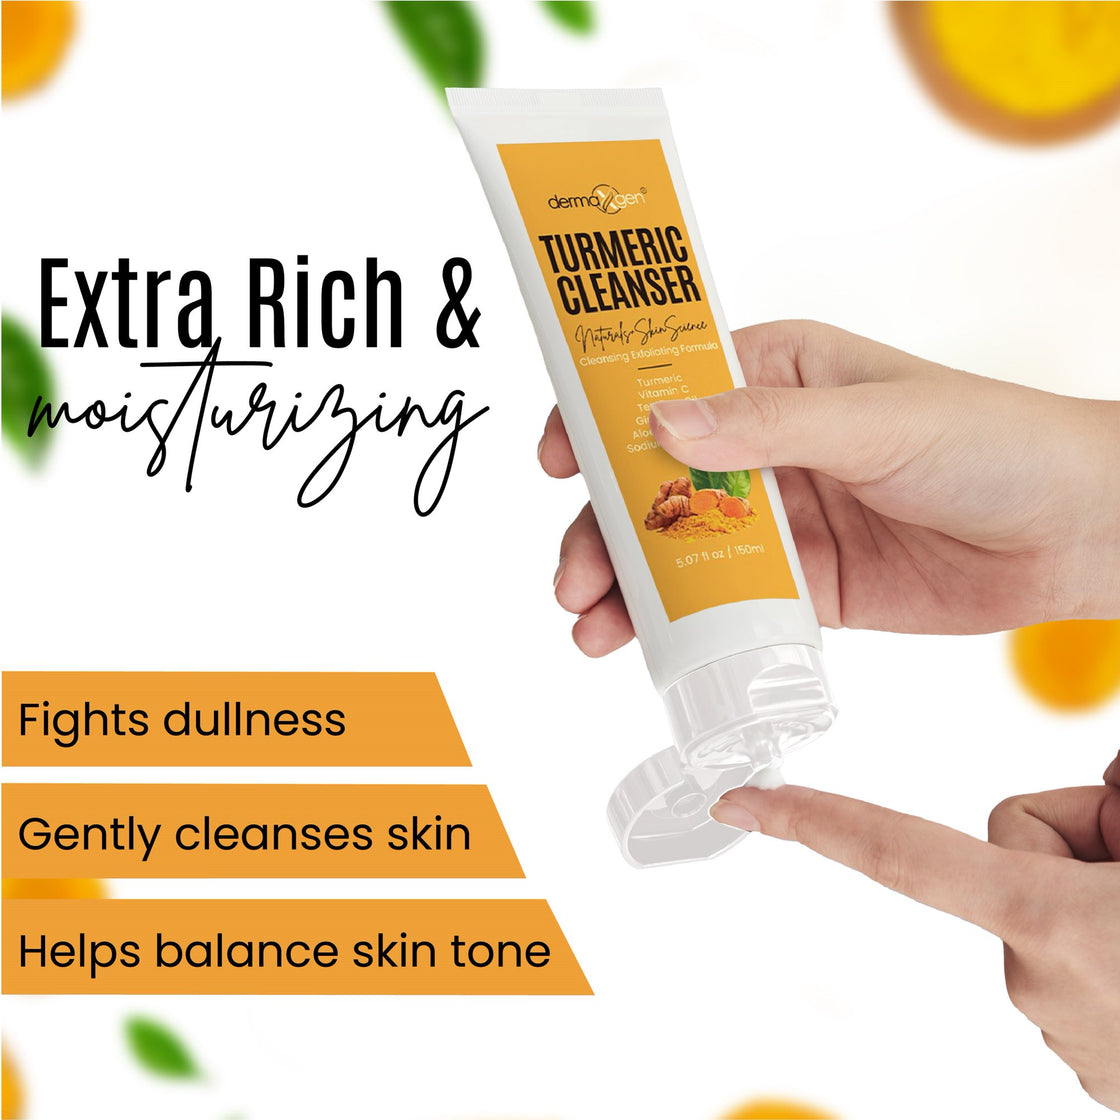 Dermaxgen Turmeric Facial Cleanser, 5 oz - 100% Natural Anti Aging Exfoliating, Nourish & Glowing Turmeric Cleanser for Clearing Acne Scars, Age Spots, Sun Damage, Discoloration